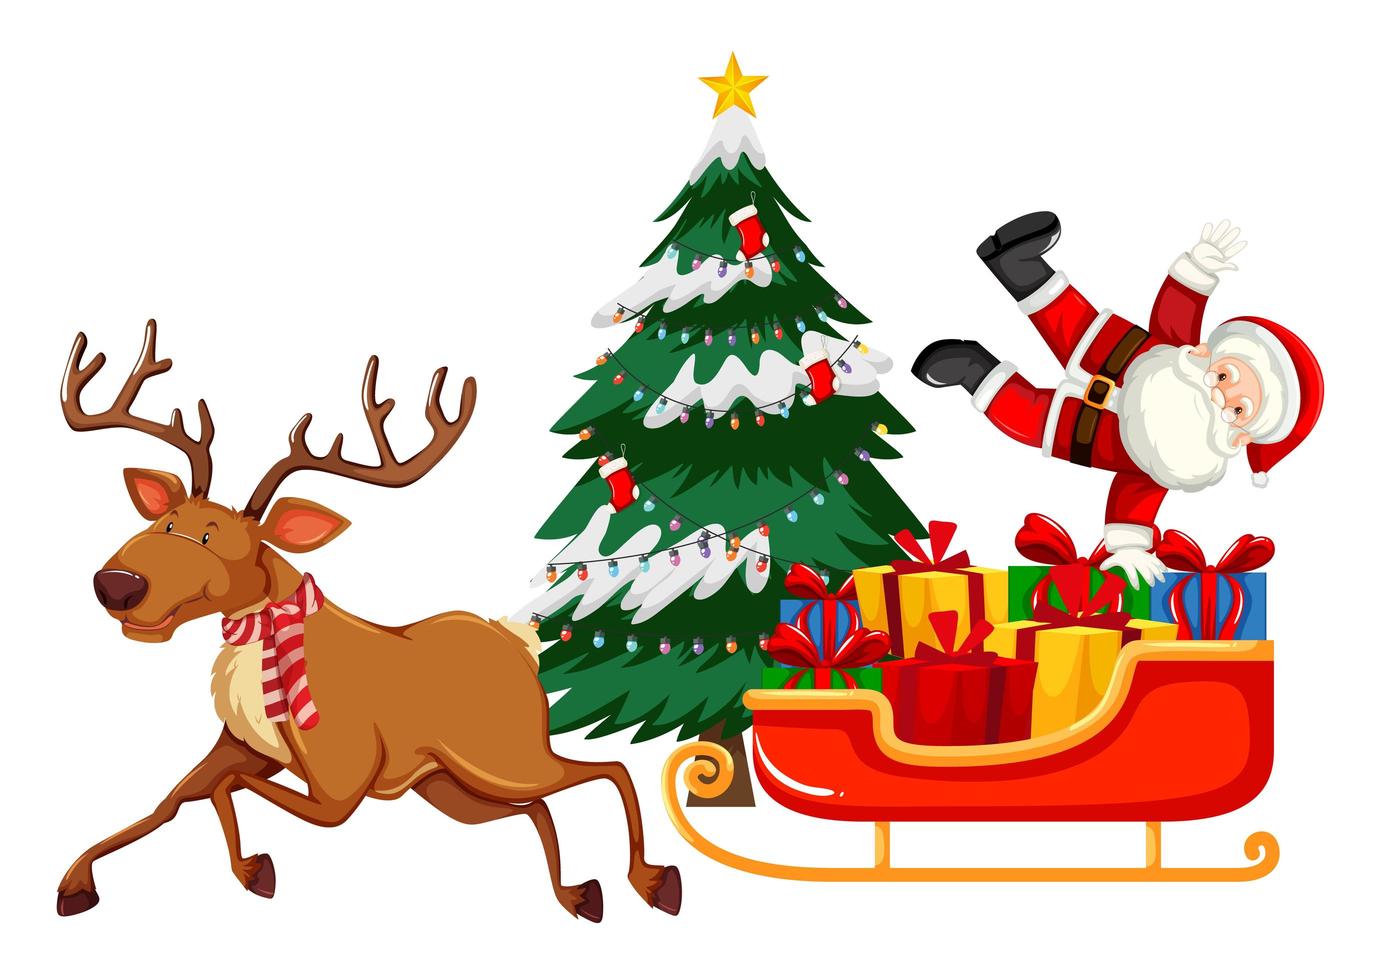 Santa Claus with raindeer and sleigh on white background vector